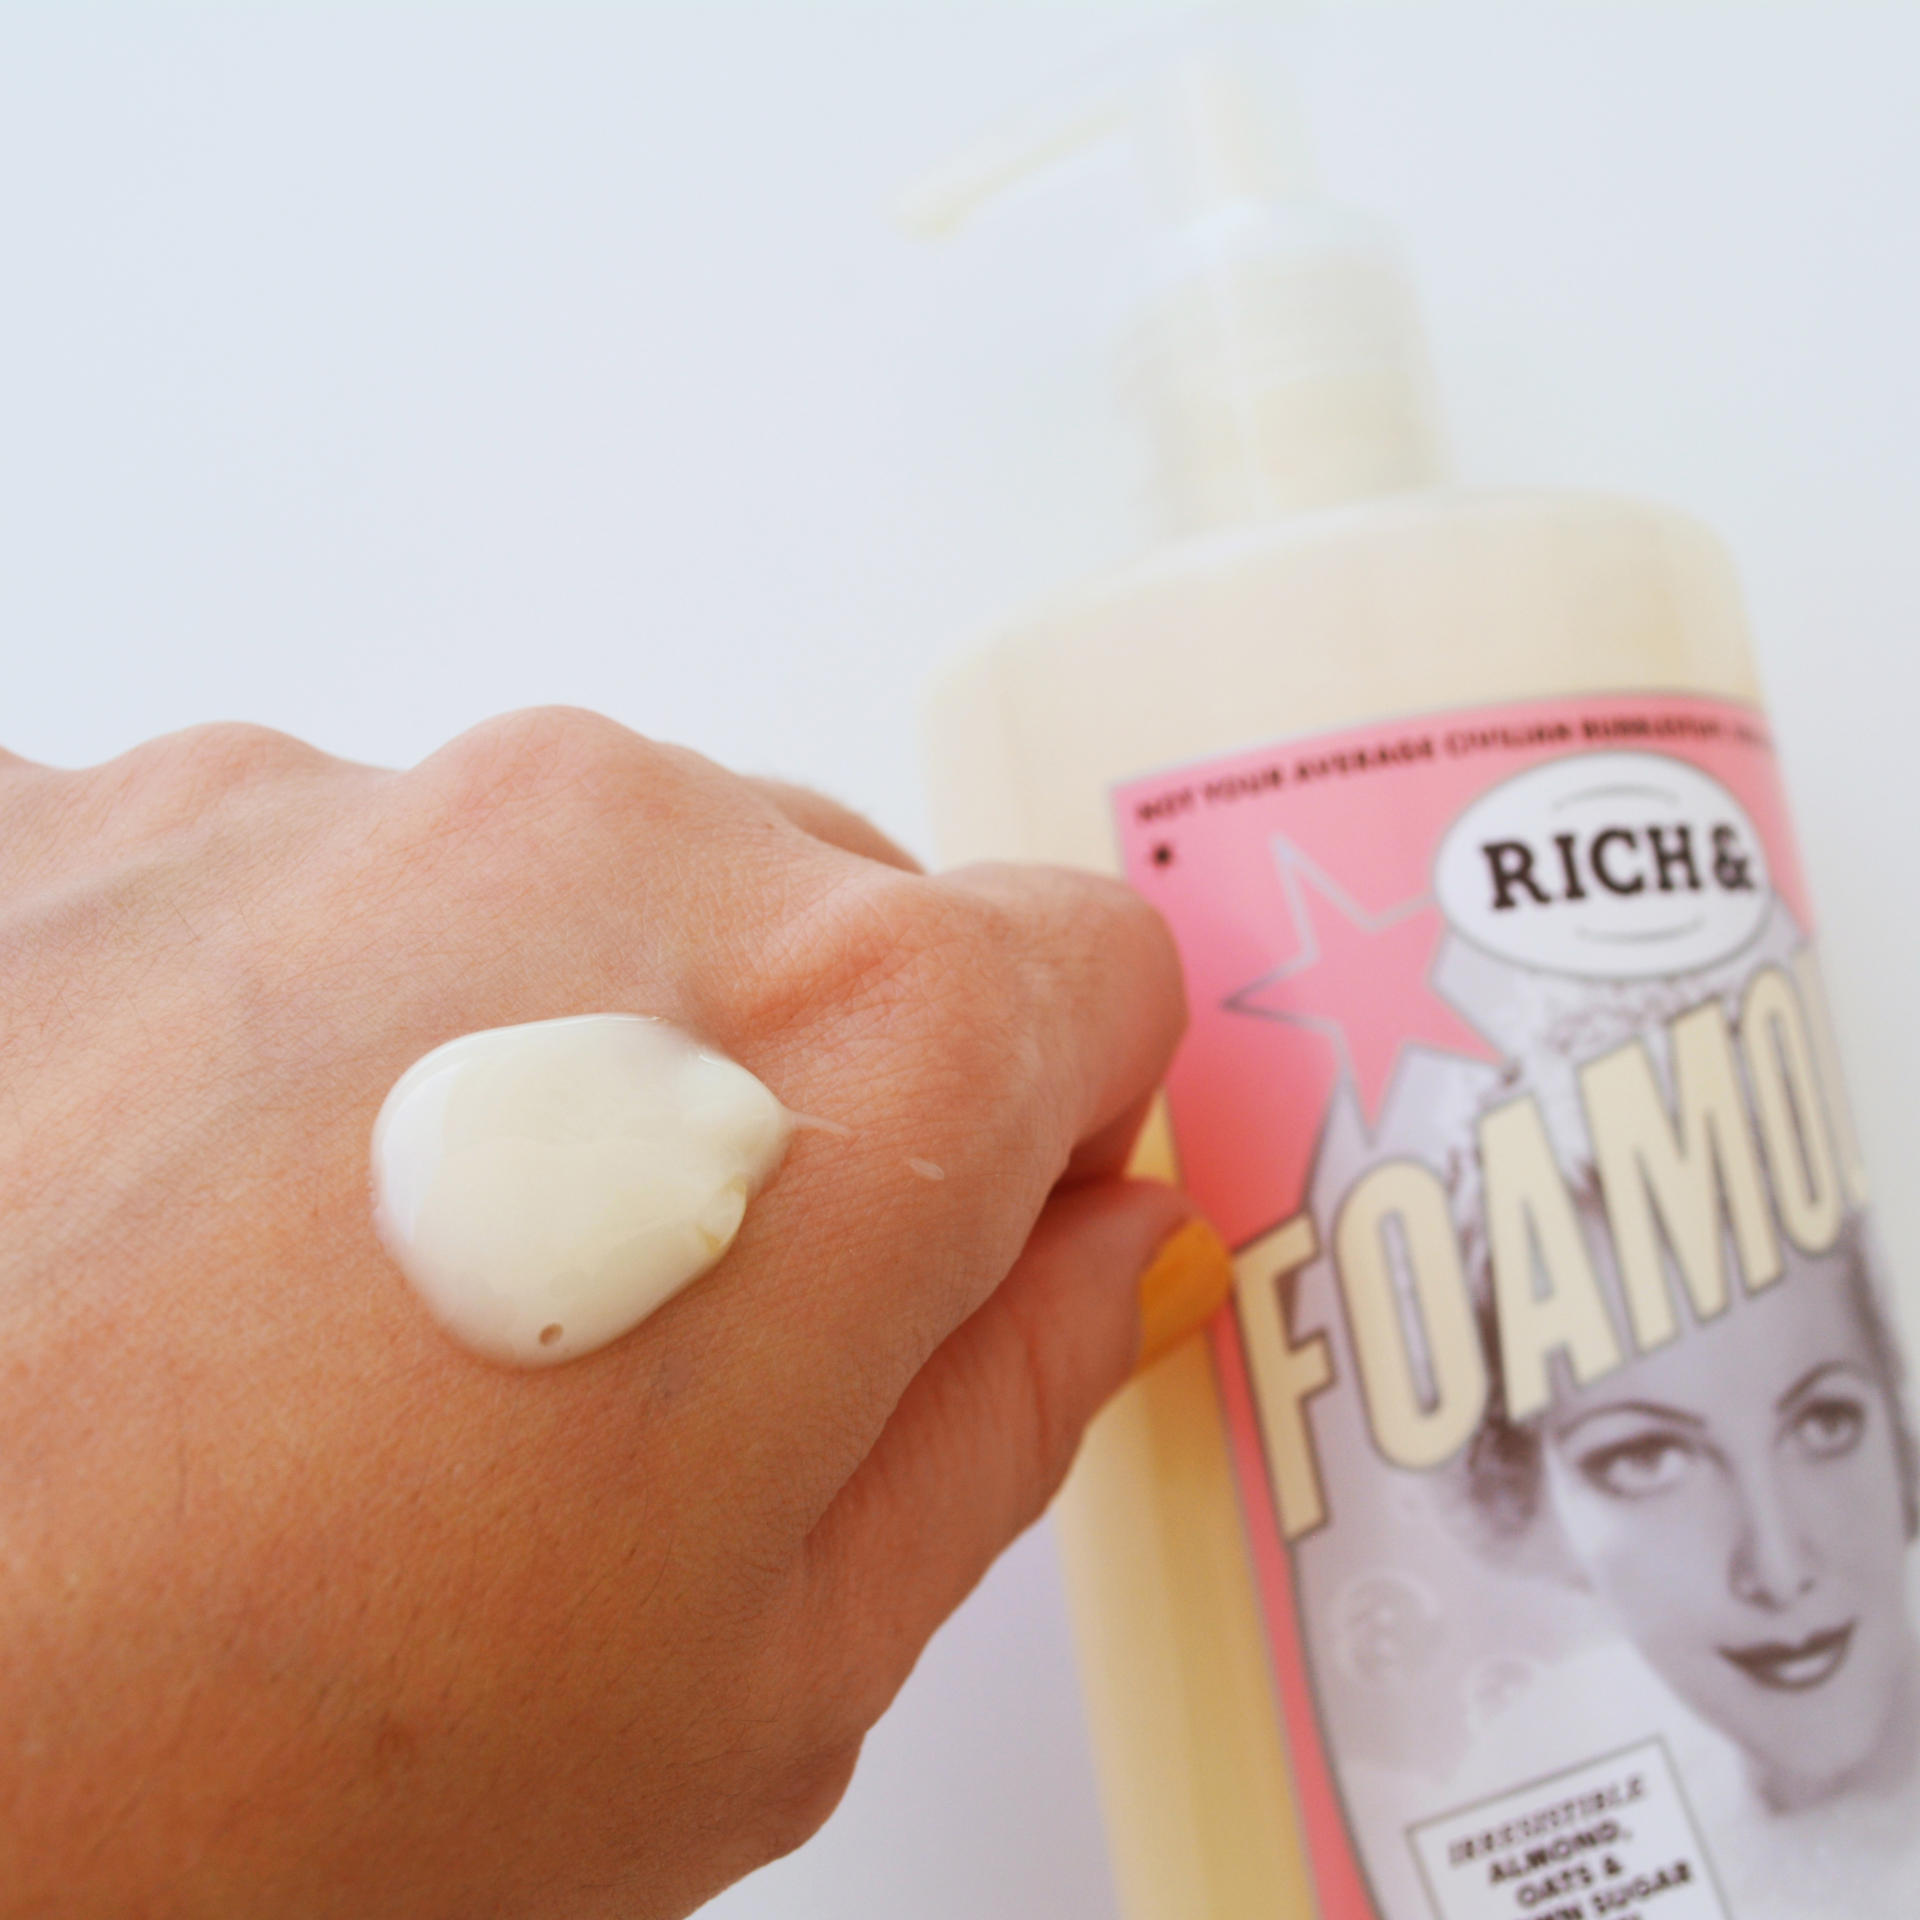 Soap & Glory Rich and Foamous Body Wash